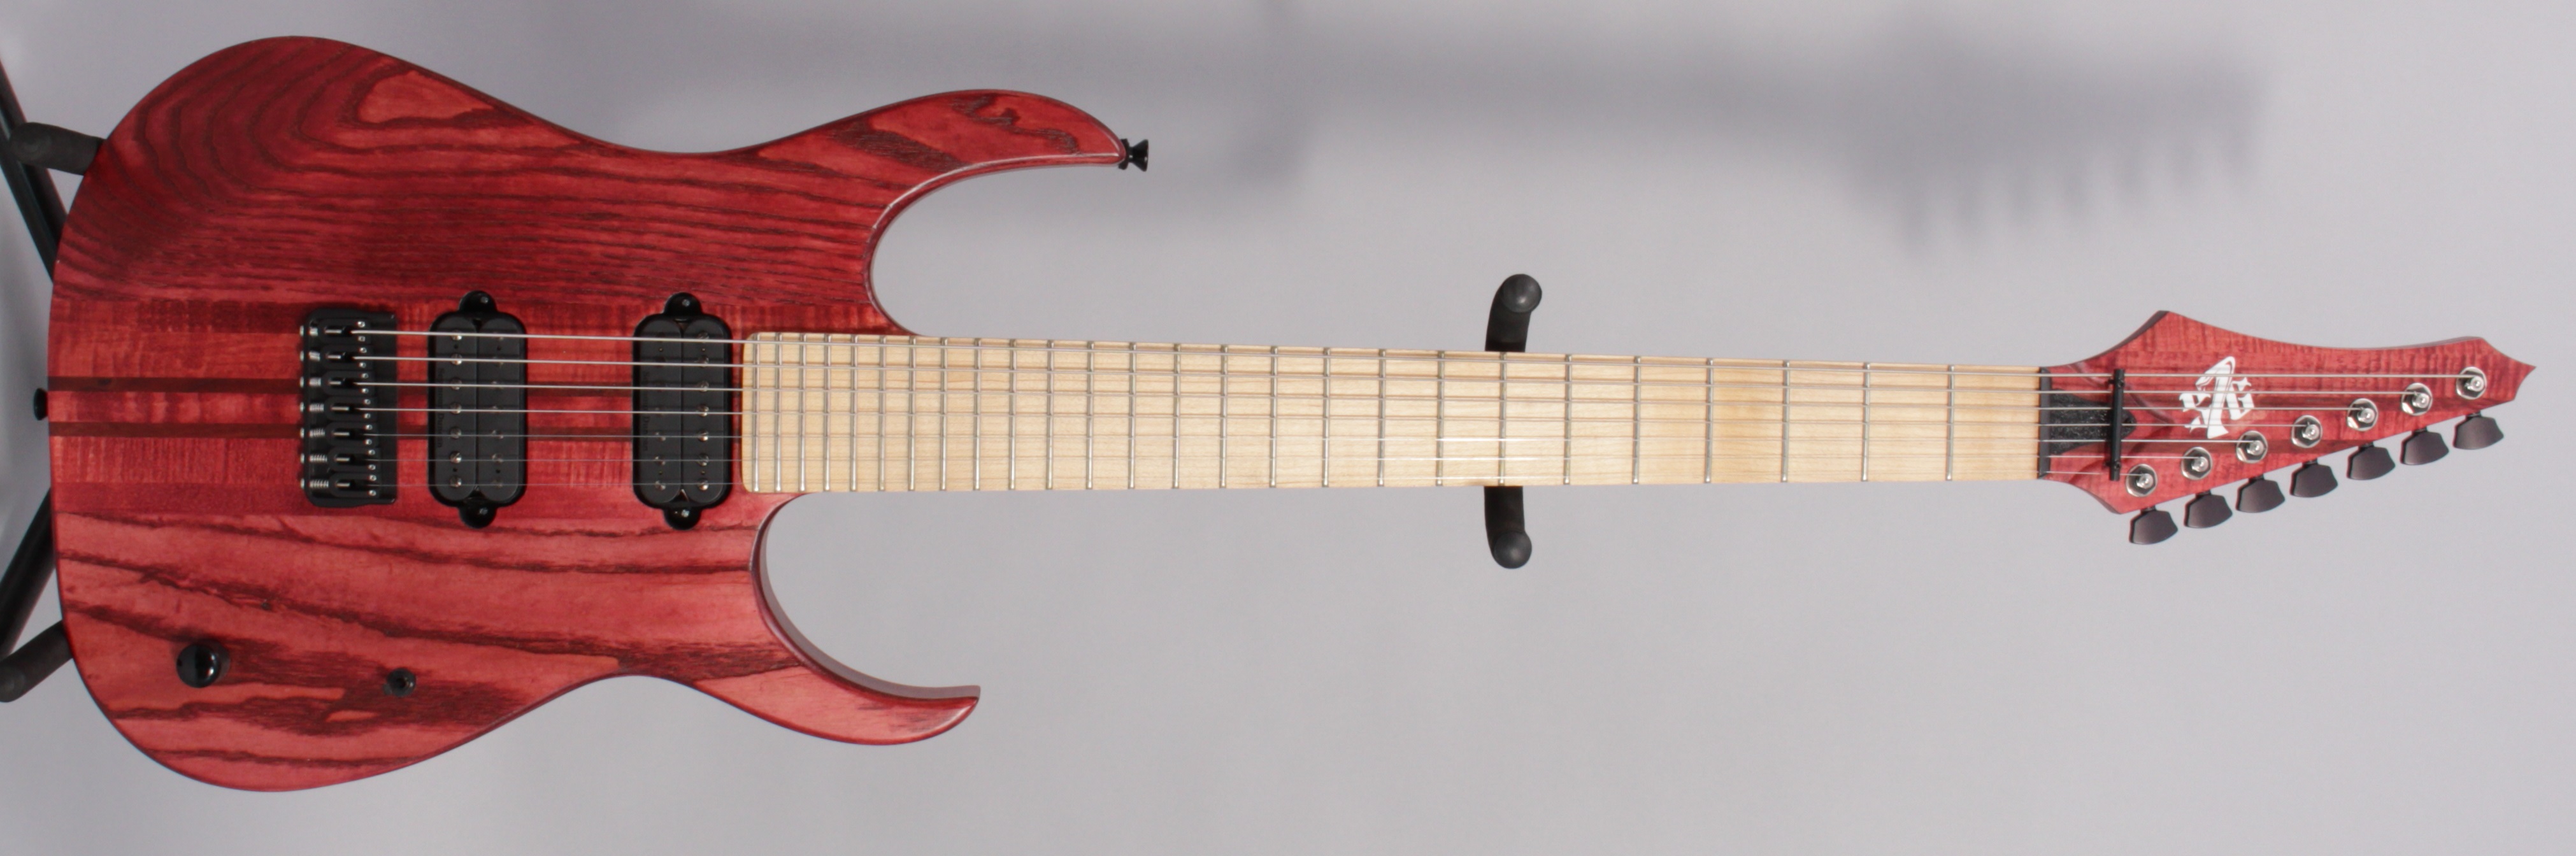 Cobra Special7 HT/T Maple Fingerboard | Strictly 7 Guitars NEWS